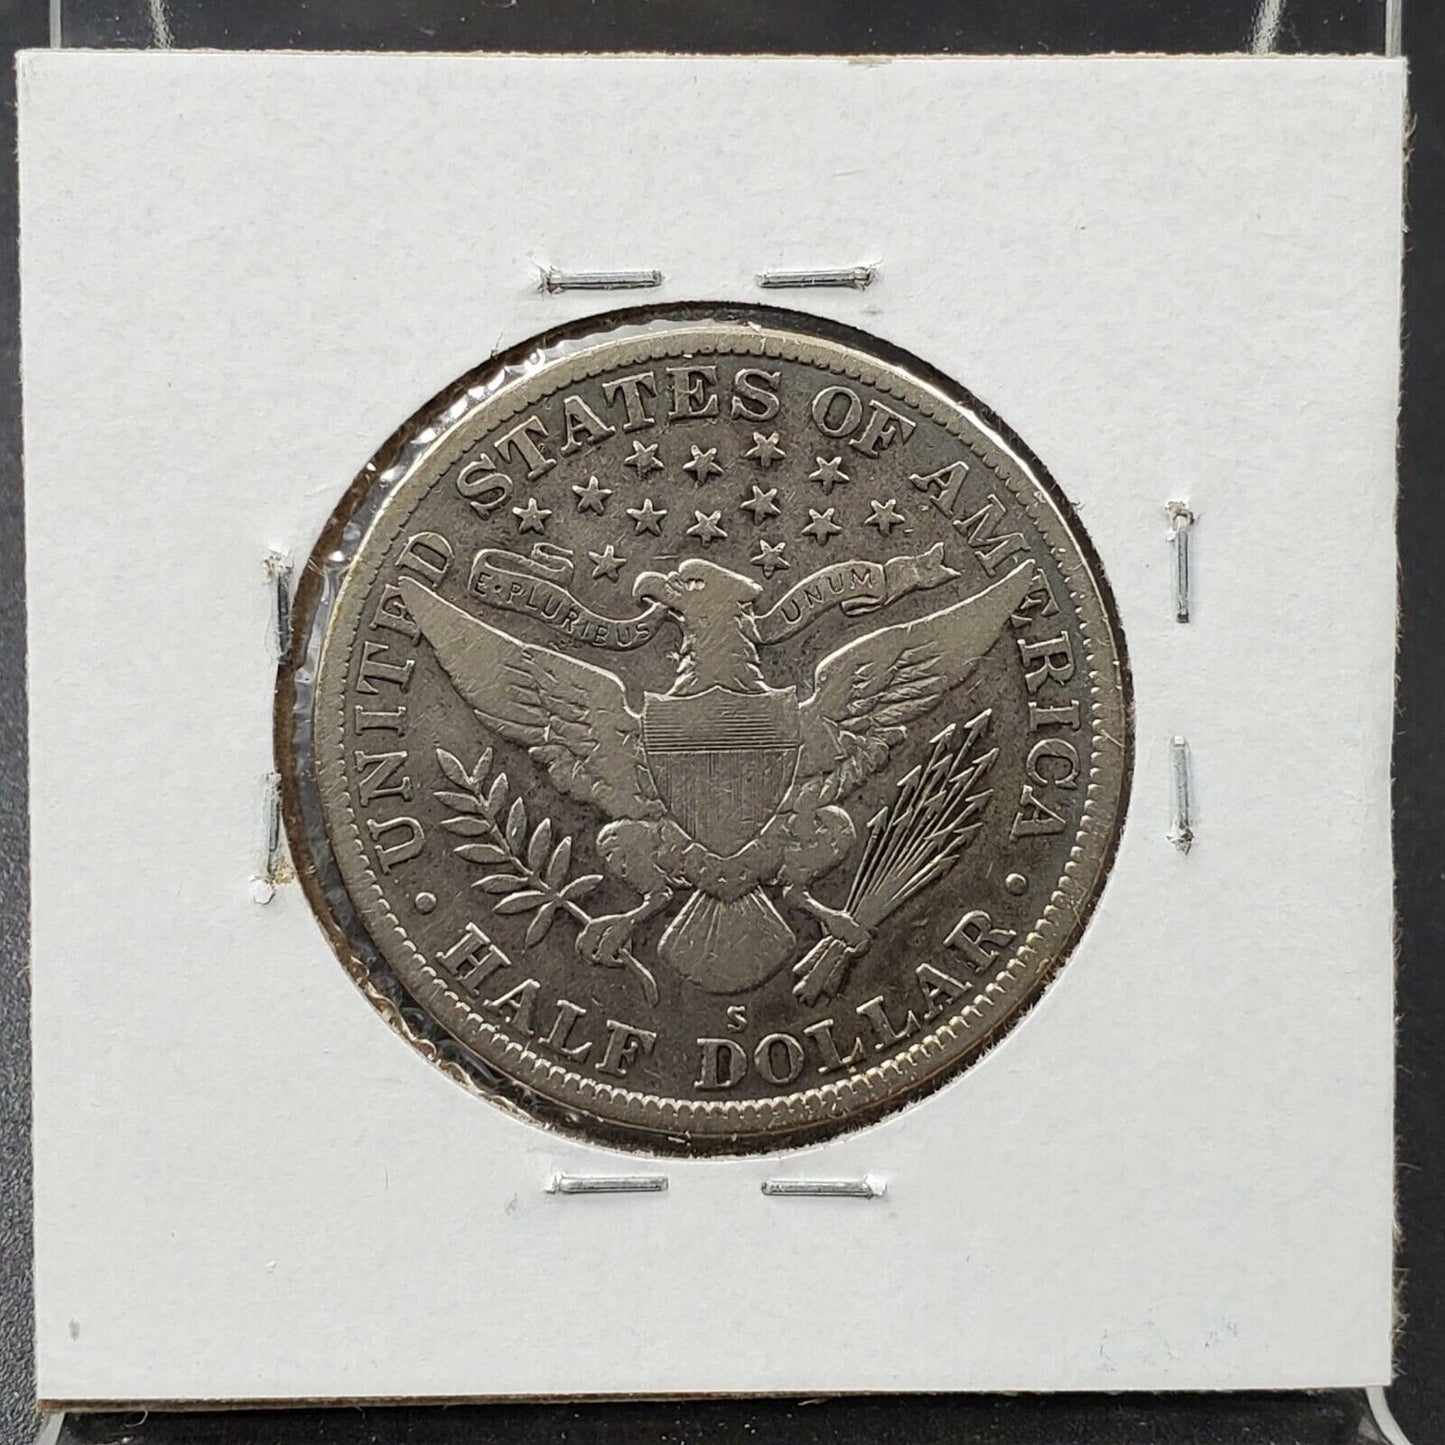 1915 S Barber Silver Eagle Half Dollar Coin Average VF Very Fine Details Clean